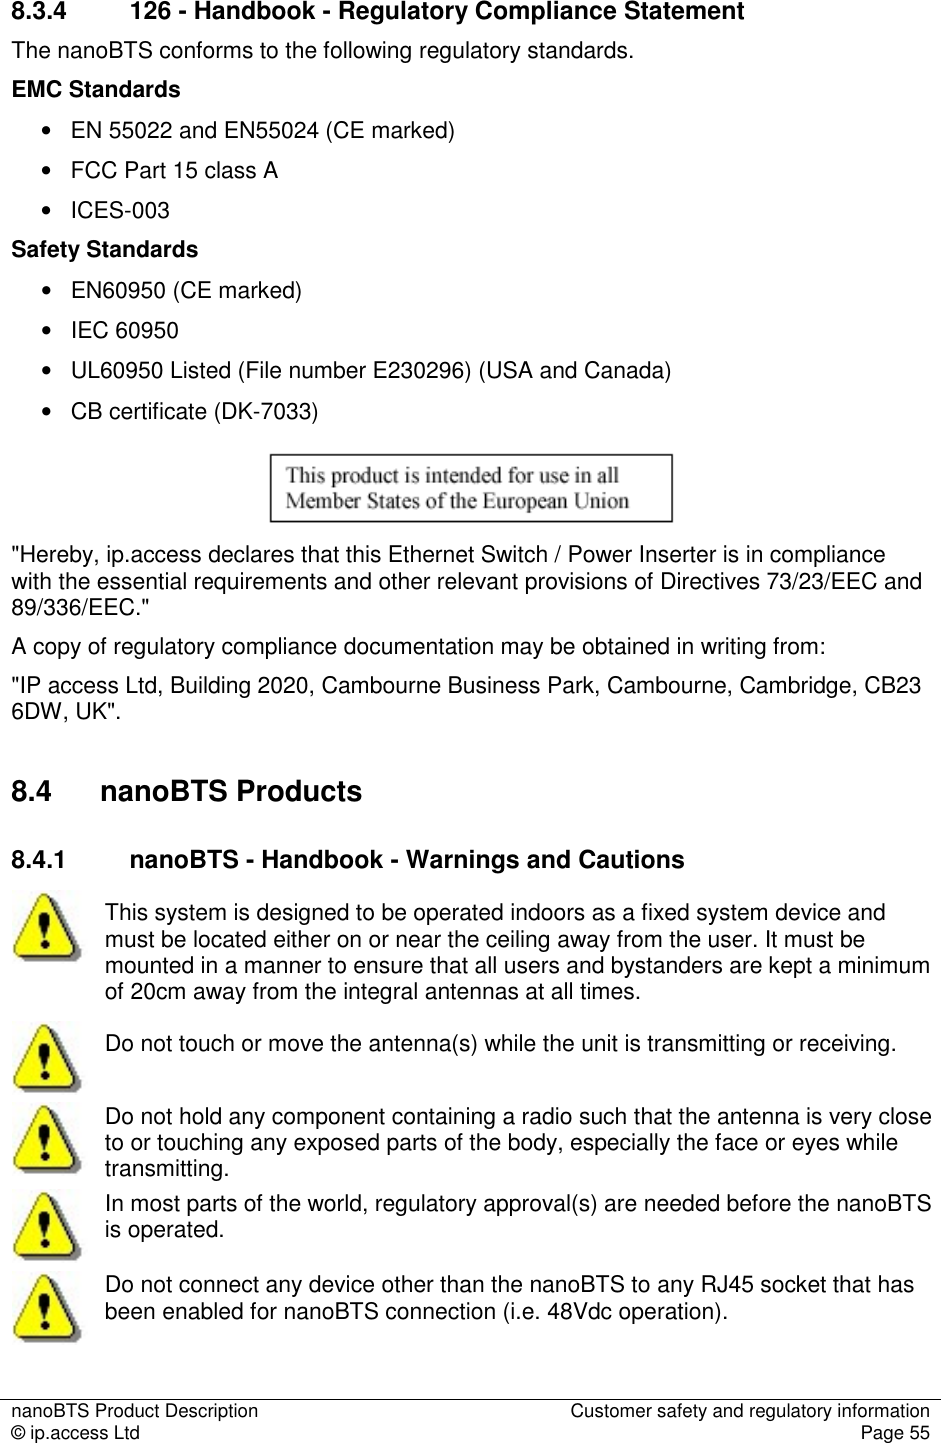 nanoBTS Product Description  Customer safety and regulatory information © ip.access Ltd  Page 55  8.3.4  126 - Handbook - Regulatory Compliance Statement The nanoBTS conforms to the following regulatory standards. EMC Standards •   EN 55022 and EN55024 (CE marked) •   FCC Part 15 class A •   ICES-003 Safety Standards •   EN60950 (CE marked) •   IEC 60950 •   UL60950 Listed (File number E230296) (USA and Canada) •   CB certificate (DK-7033)  &quot;Hereby, ip.access declares that this Ethernet Switch / Power Inserter is in compliance with the essential requirements and other relevant provisions of Directives 73/23/EEC and 89/336/EEC.&quot; A copy of regulatory compliance documentation may be obtained in writing from: &quot;IP access Ltd, Building 2020, Cambourne Business Park, Cambourne, Cambridge, CB23 6DW, UK&quot;. 8.4  nanoBTS Products 8.4.1  nanoBTS - Handbook - Warnings and Cautions  This system is designed to be operated indoors as a fixed system device and must be located either on or near the ceiling away from the user. It must be mounted in a manner to ensure that all users and bystanders are kept a minimum of 20cm away from the integral antennas at all times.  Do not touch or move the antenna(s) while the unit is transmitting or receiving.  Do not hold any component containing a radio such that the antenna is very close to or touching any exposed parts of the body, especially the face or eyes while transmitting.  In most parts of the world, regulatory approval(s) are needed before the nanoBTS is operated.  Do not connect any device other than the nanoBTS to any RJ45 socket that has been enabled for nanoBTS connection (i.e. 48Vdc operation). 